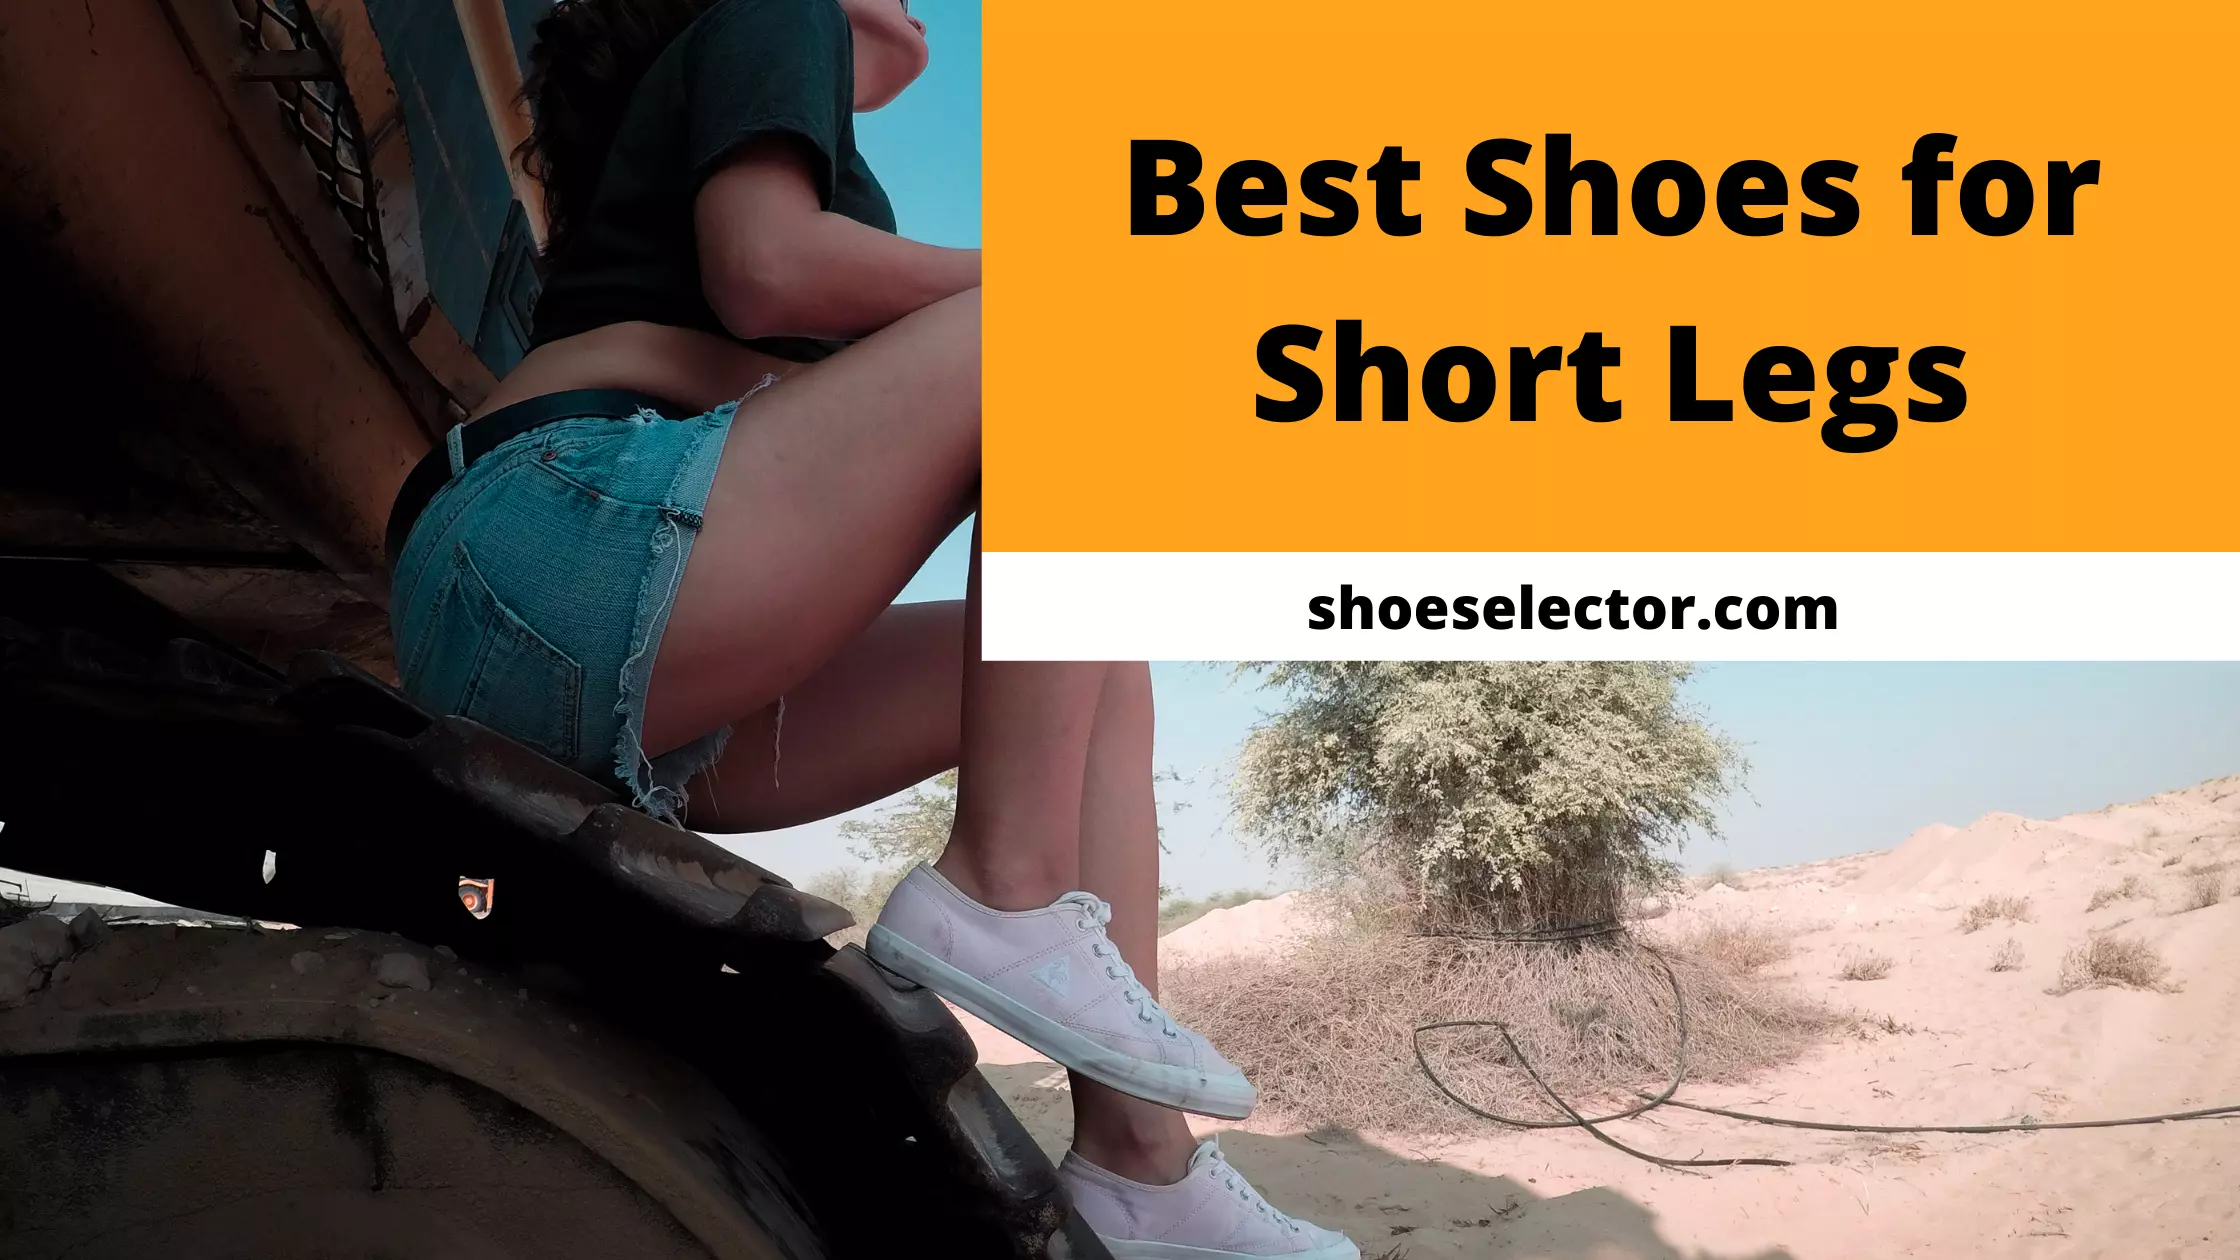 Best Shoes for Short Legs With Shopping Tips